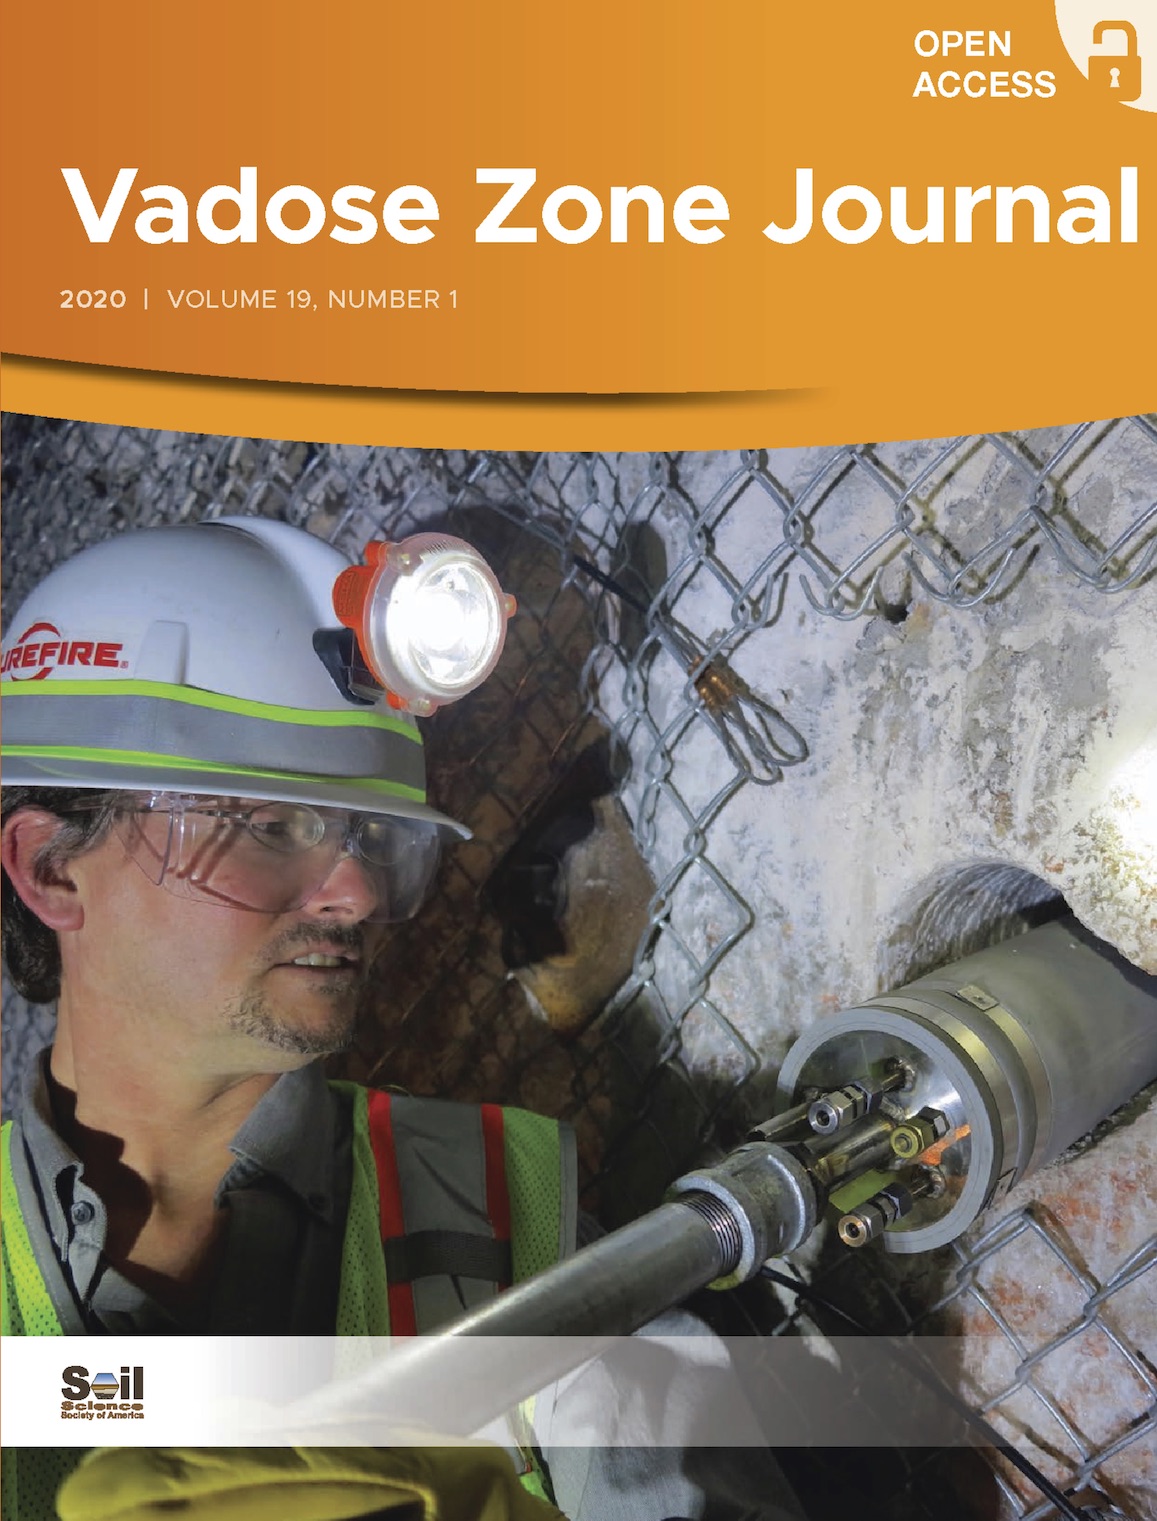 Vadose Zone Cover #1